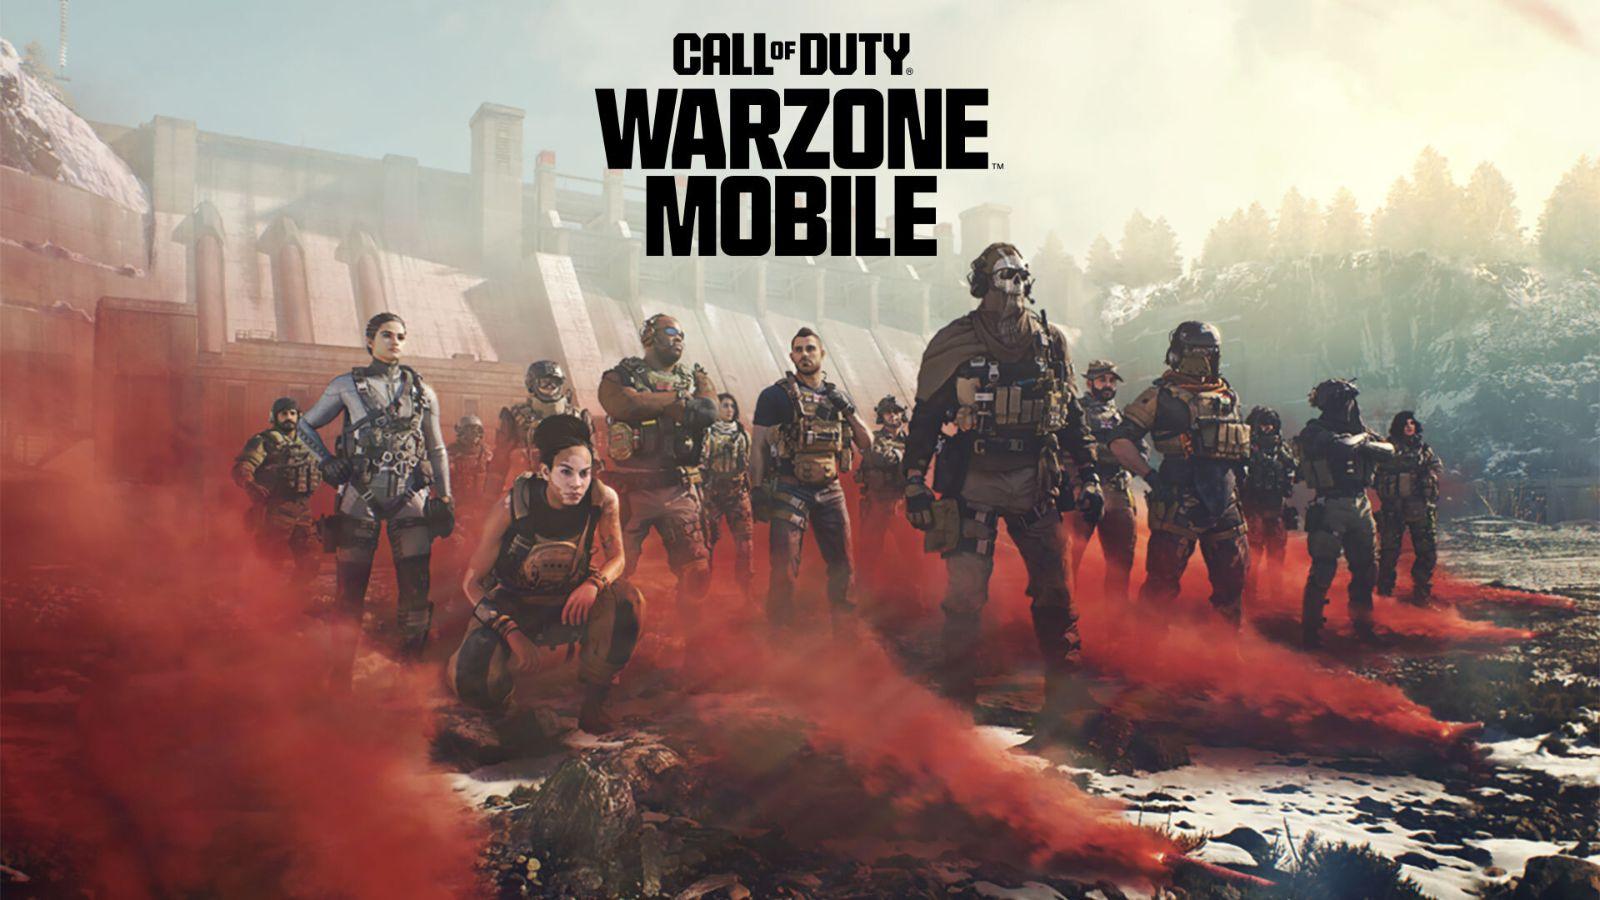 Call of Duty Warzone Mobile release date, explained